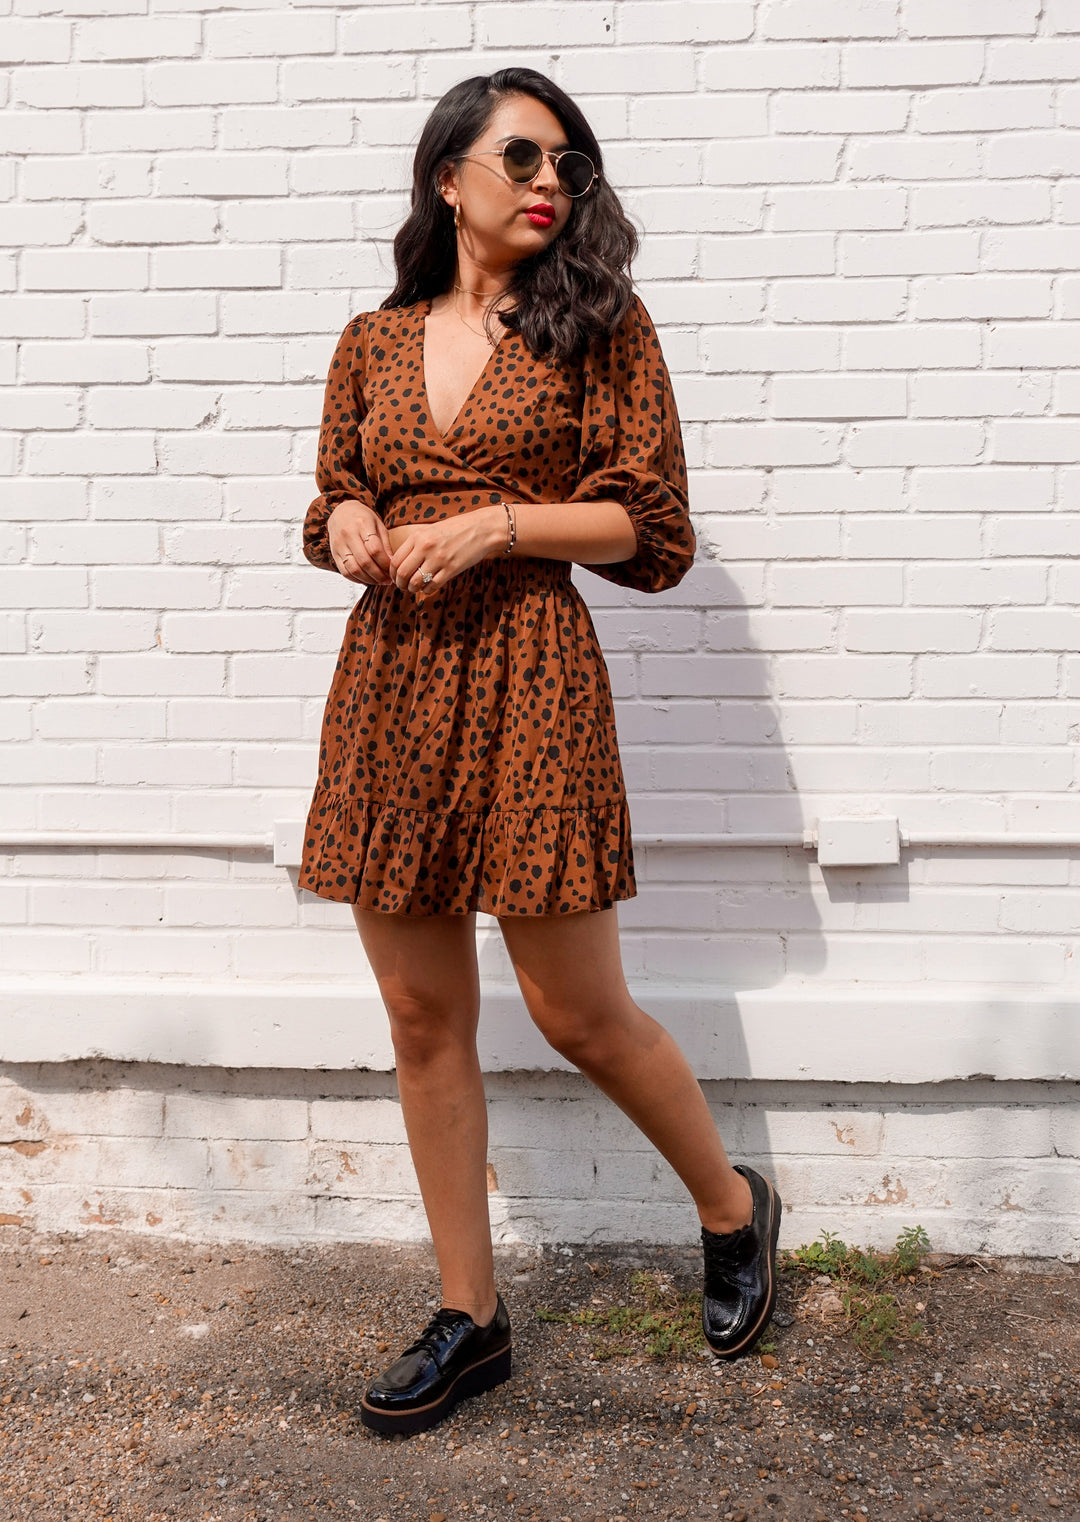 You're Not The One Dress - Cognac/Black